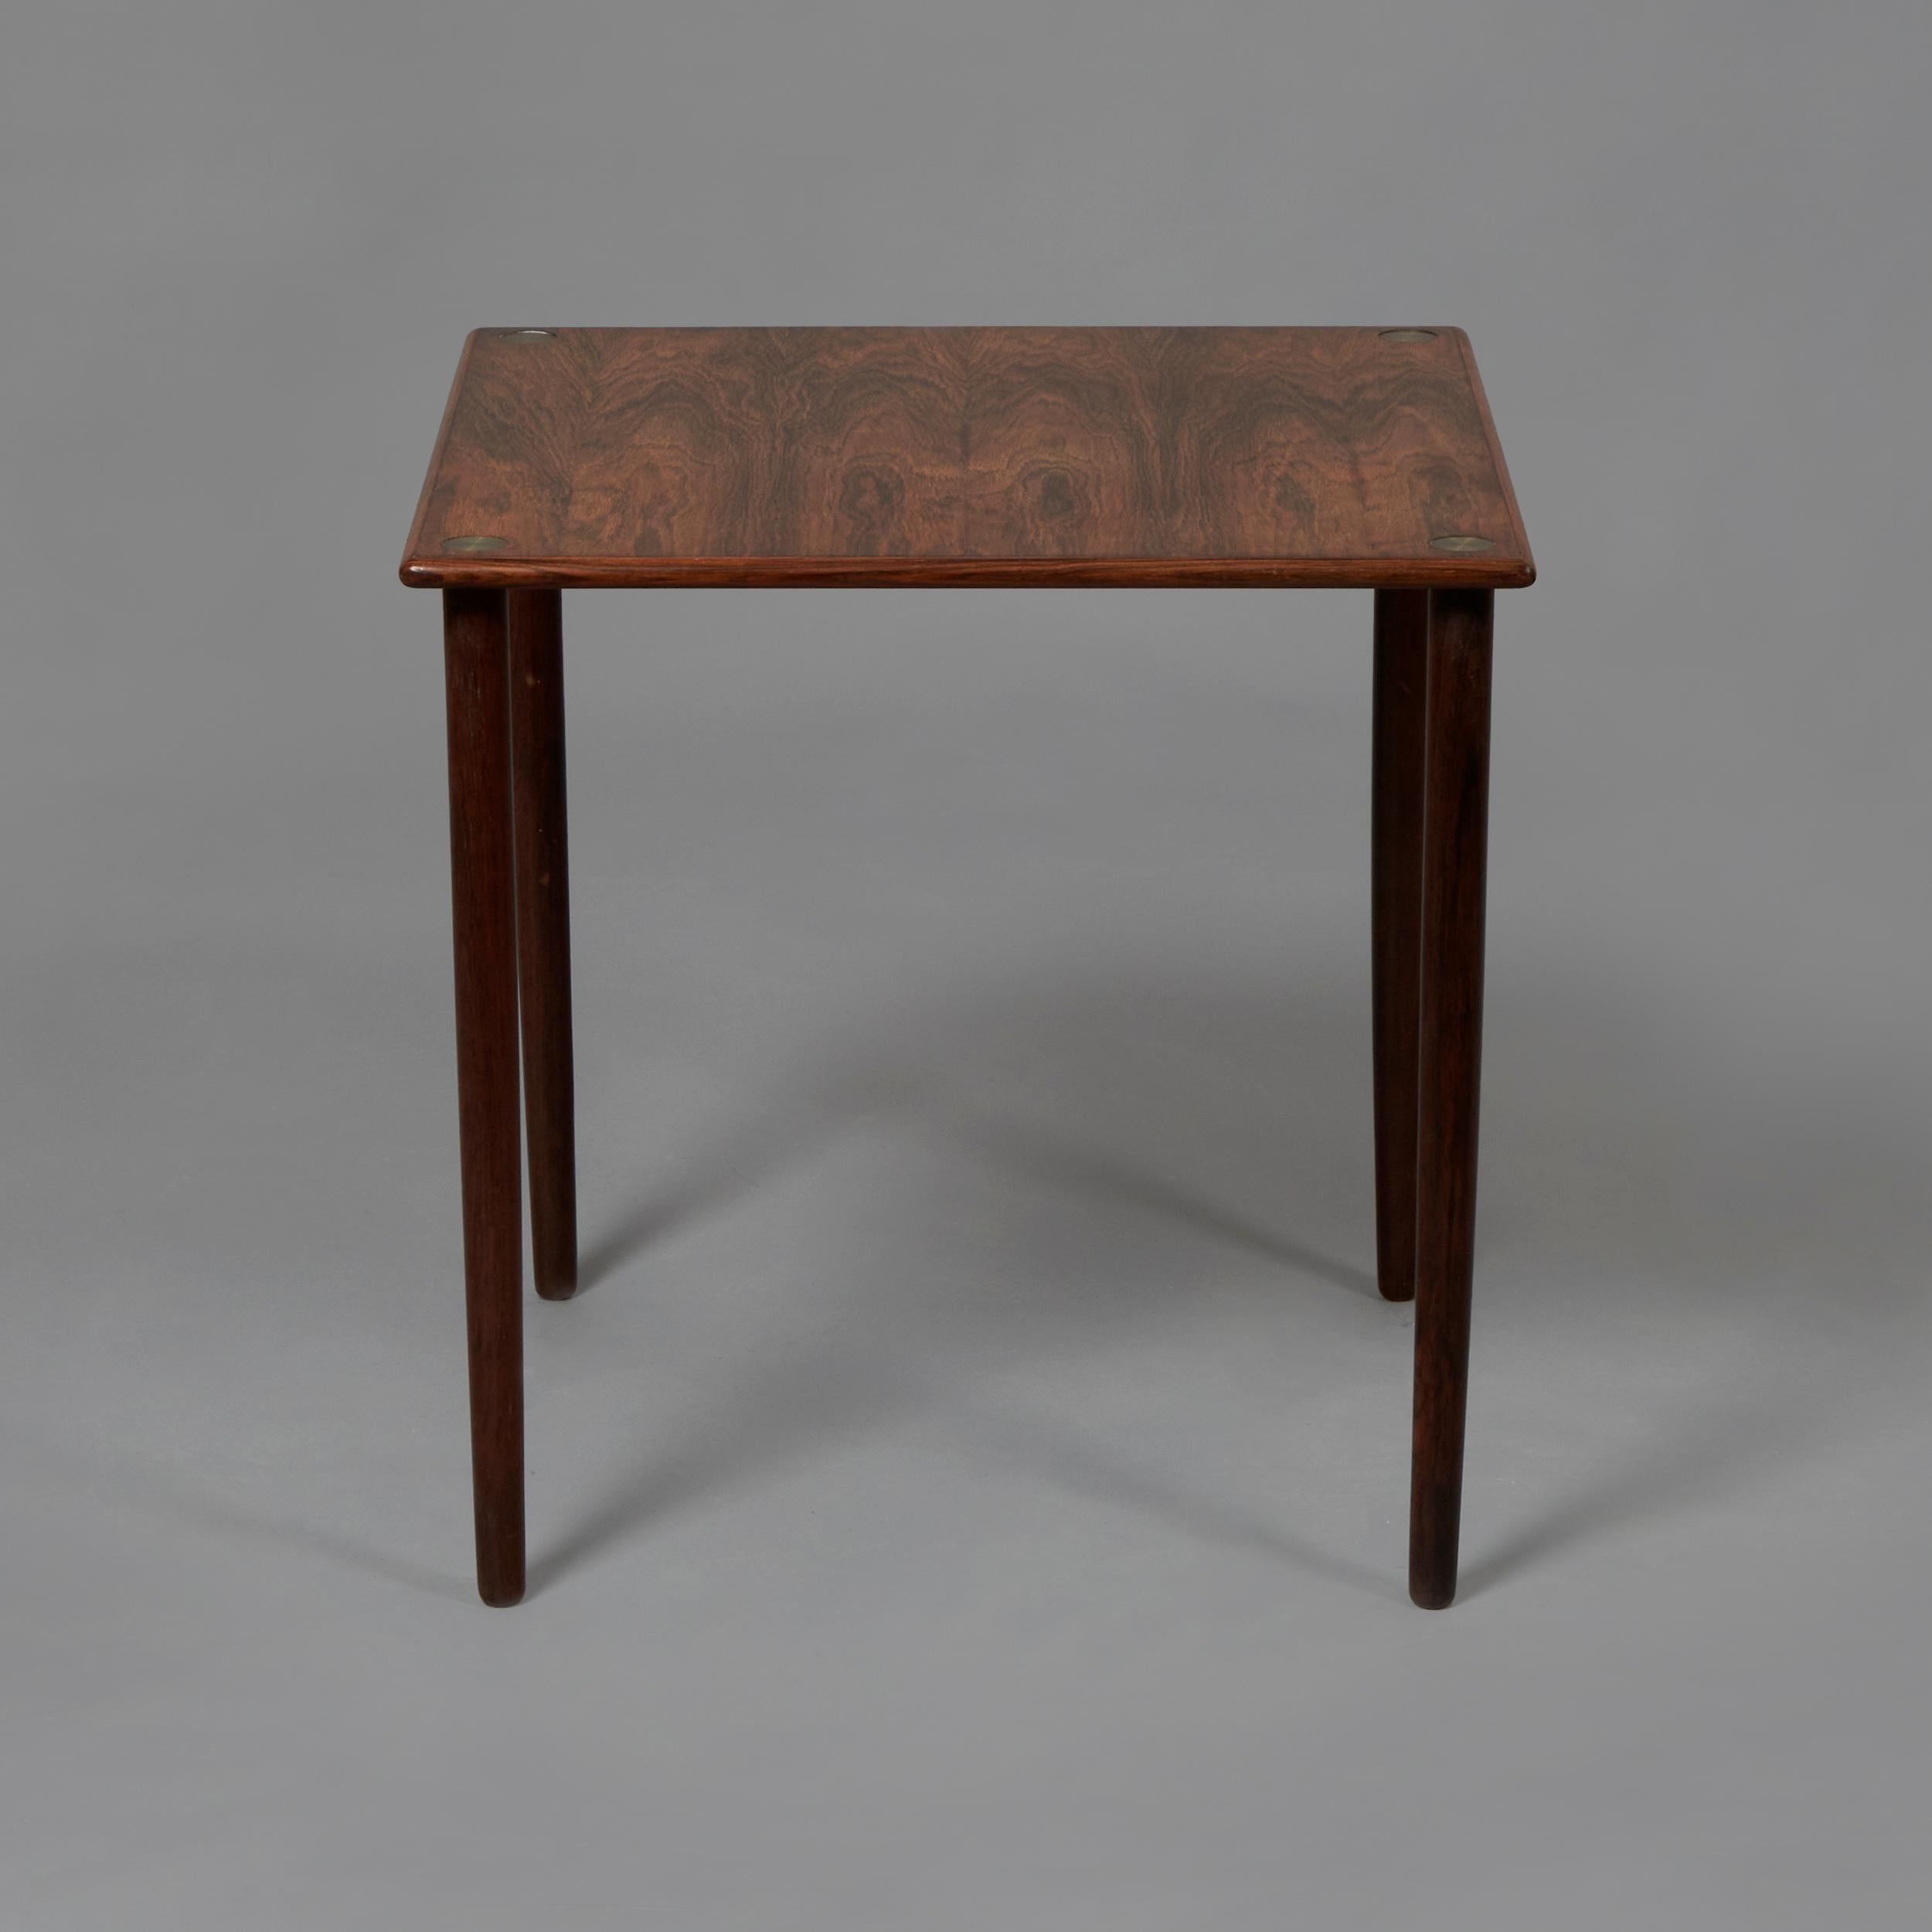 Side table in rosewood and aluminum details. Model 4433 designed by Georg Petersen for GP Farum. Excellent condition, fully restored. Denmark, 1960s.

